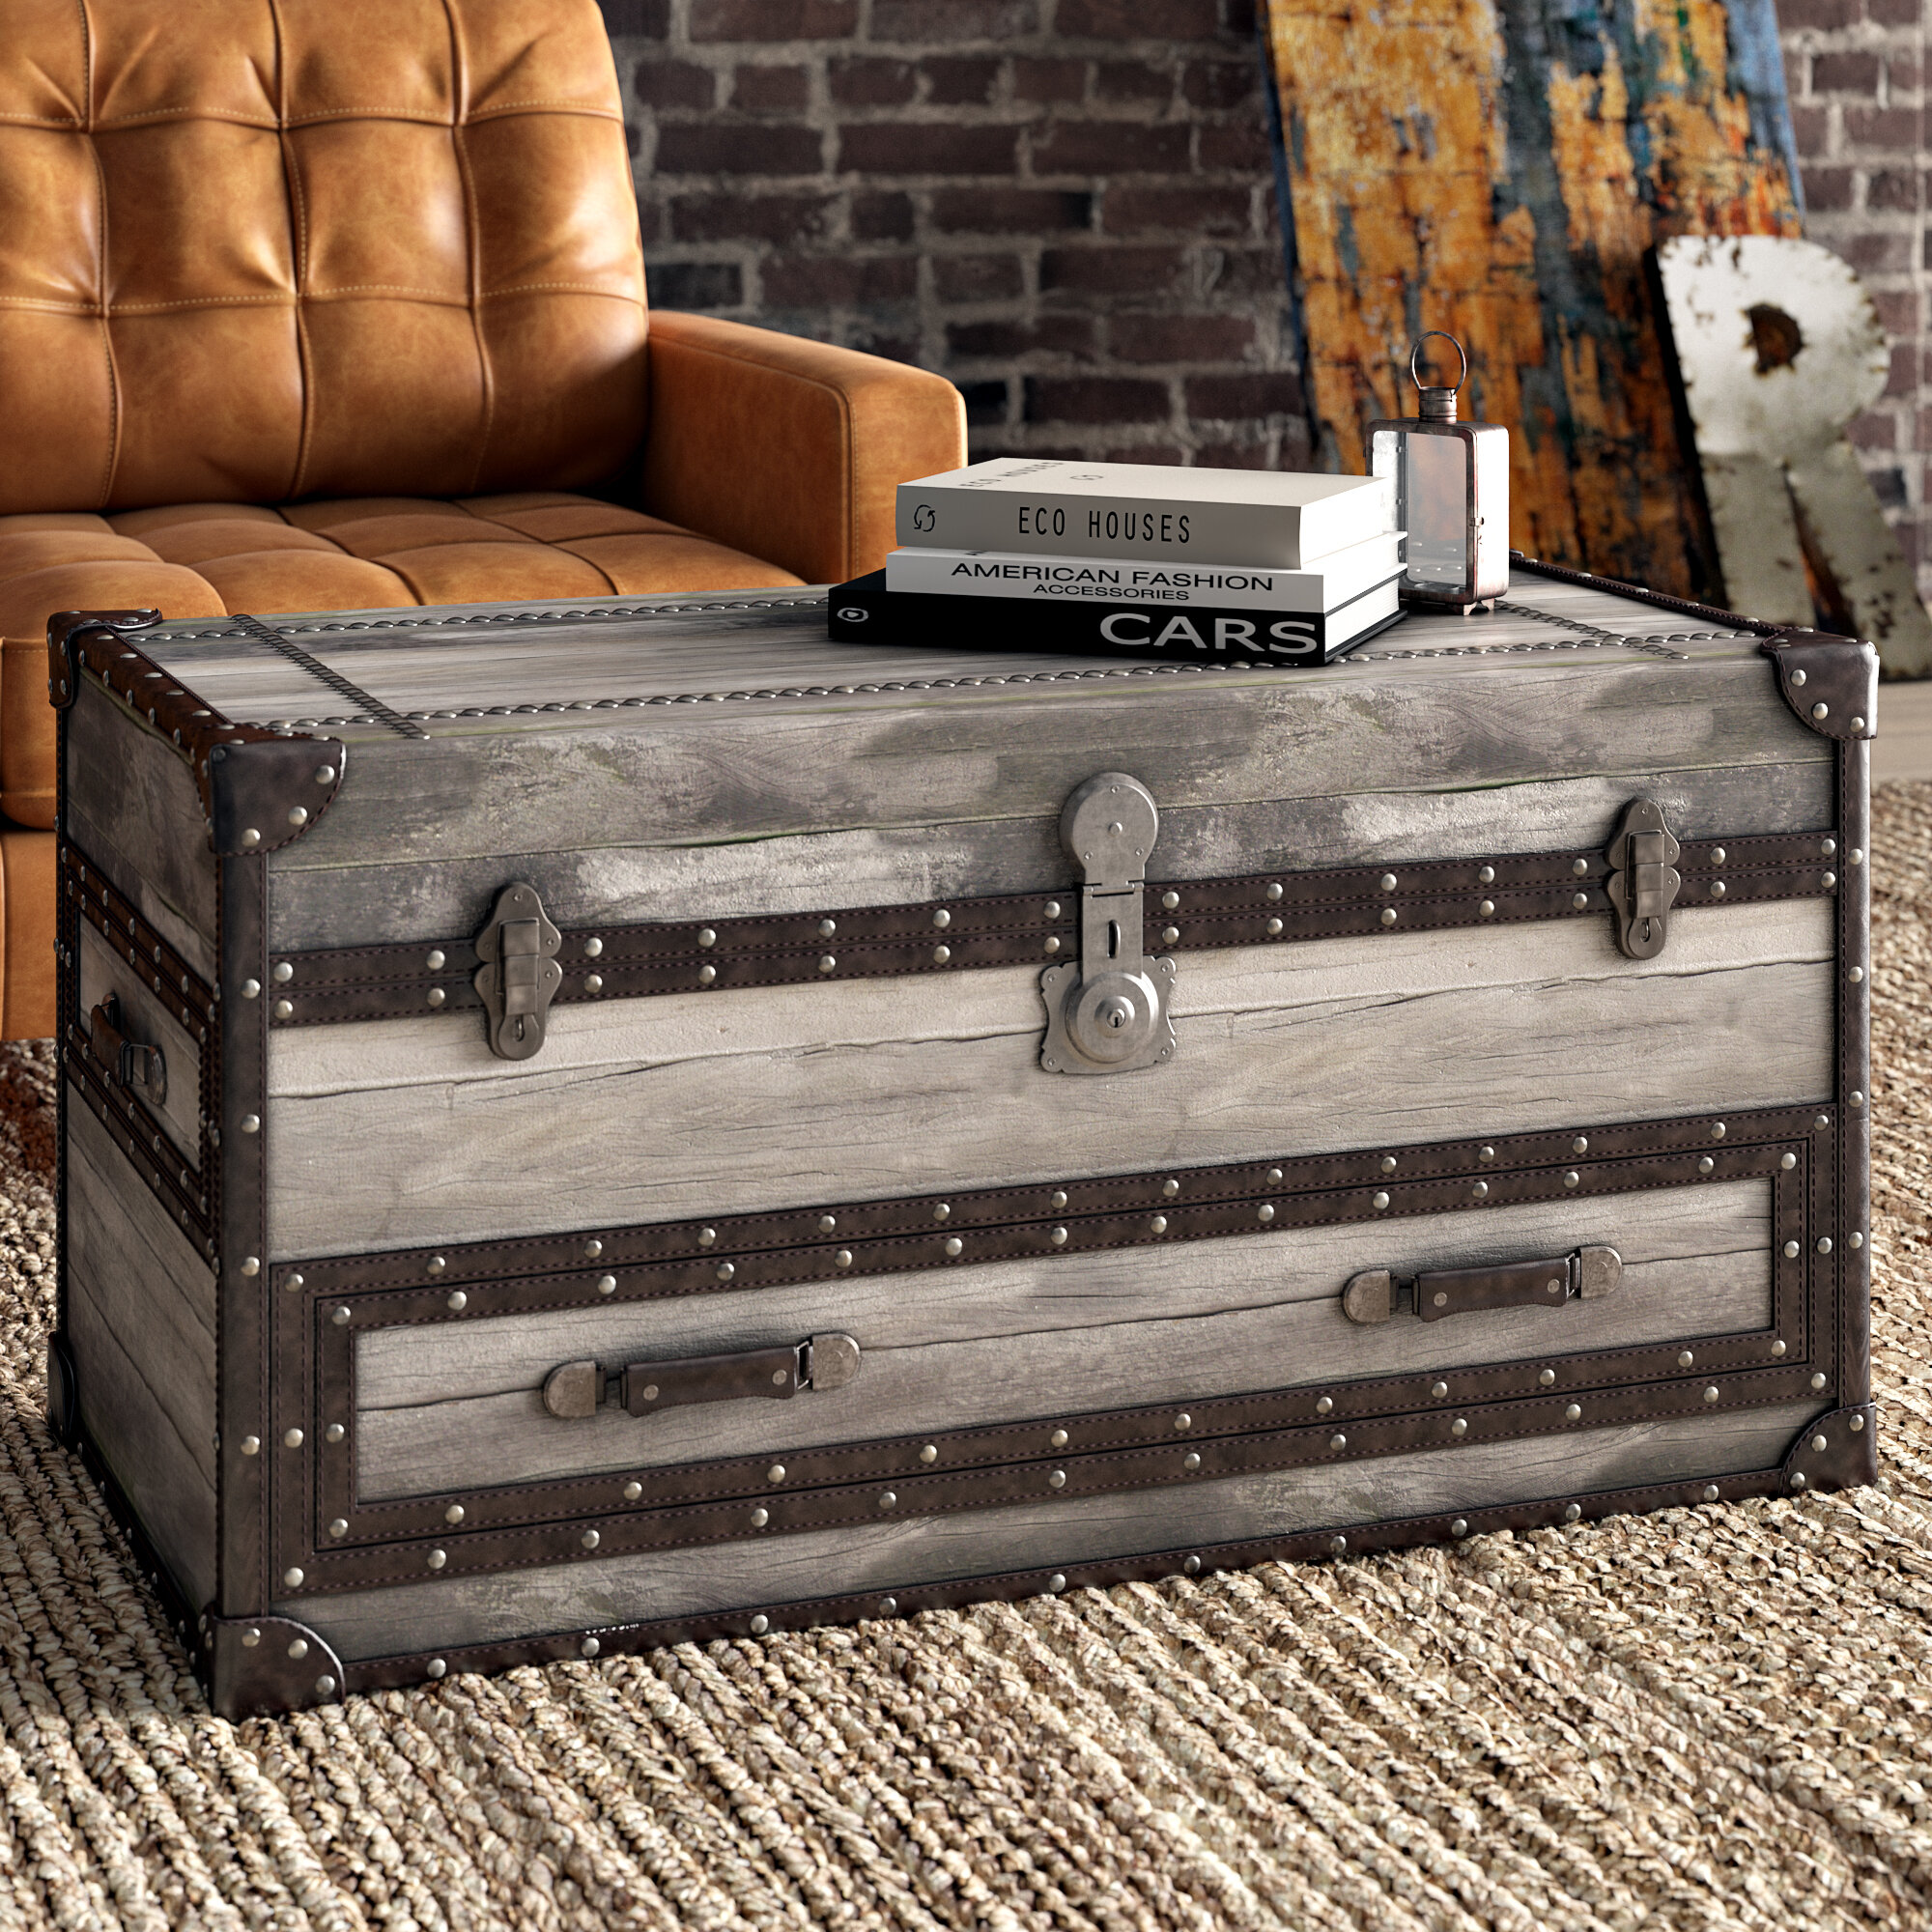 Treasure Chest New Rustic Corrugated Metal Solid Wood Storage Chest Trunk Bed Box Coffee Table Home Garden